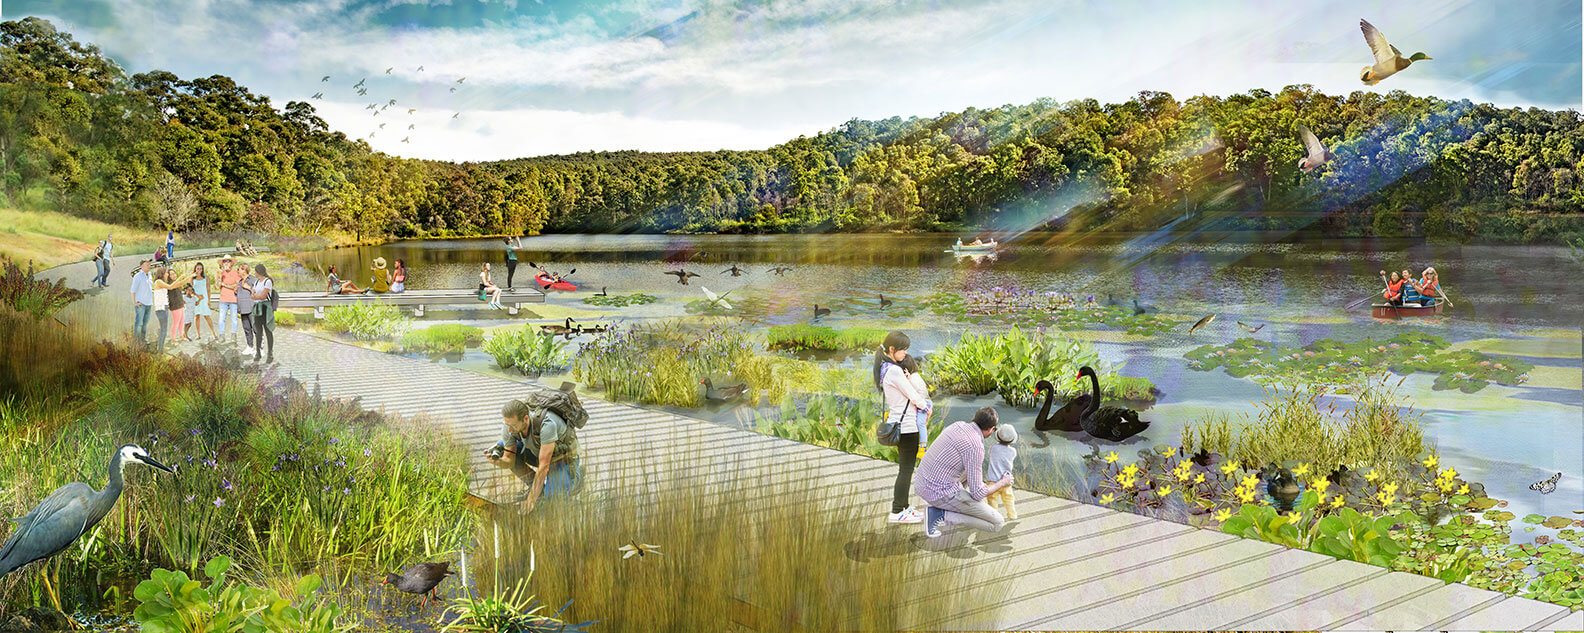 Artist impression of lake with people and birds